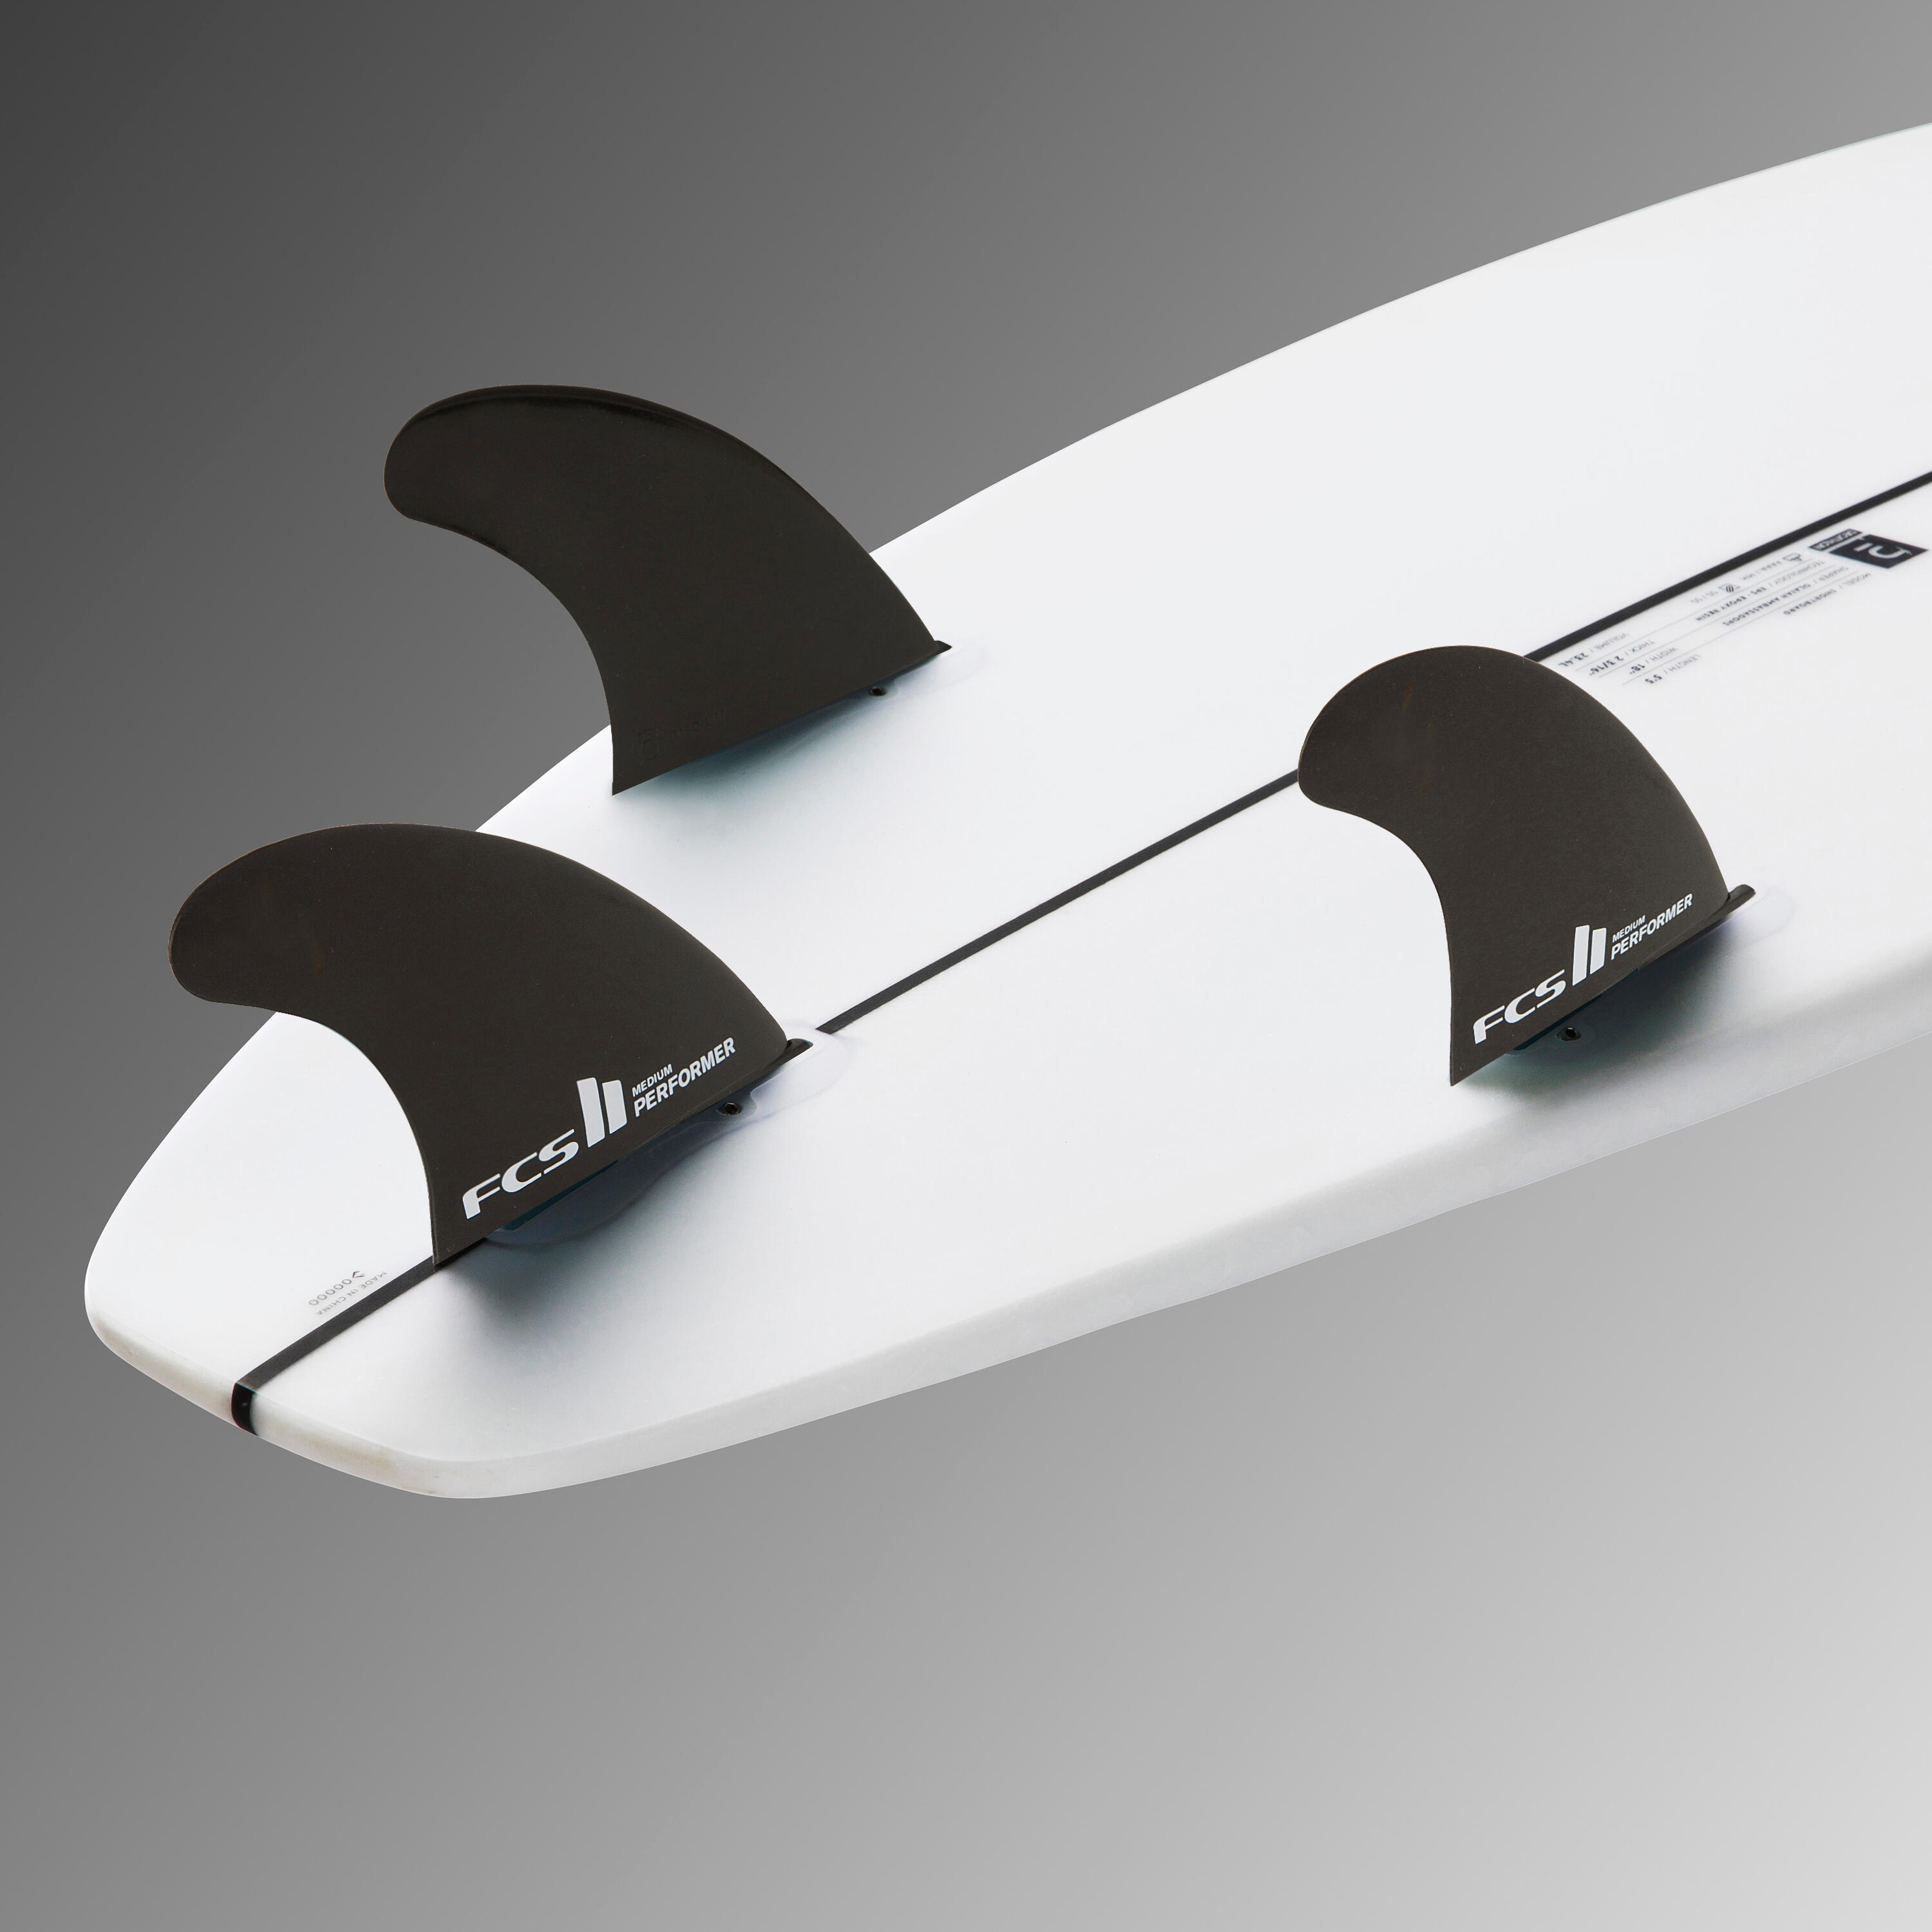 SHORTBOARD 900 5'5" 24 L. Supplied with 3 FCS2 fins 11/14